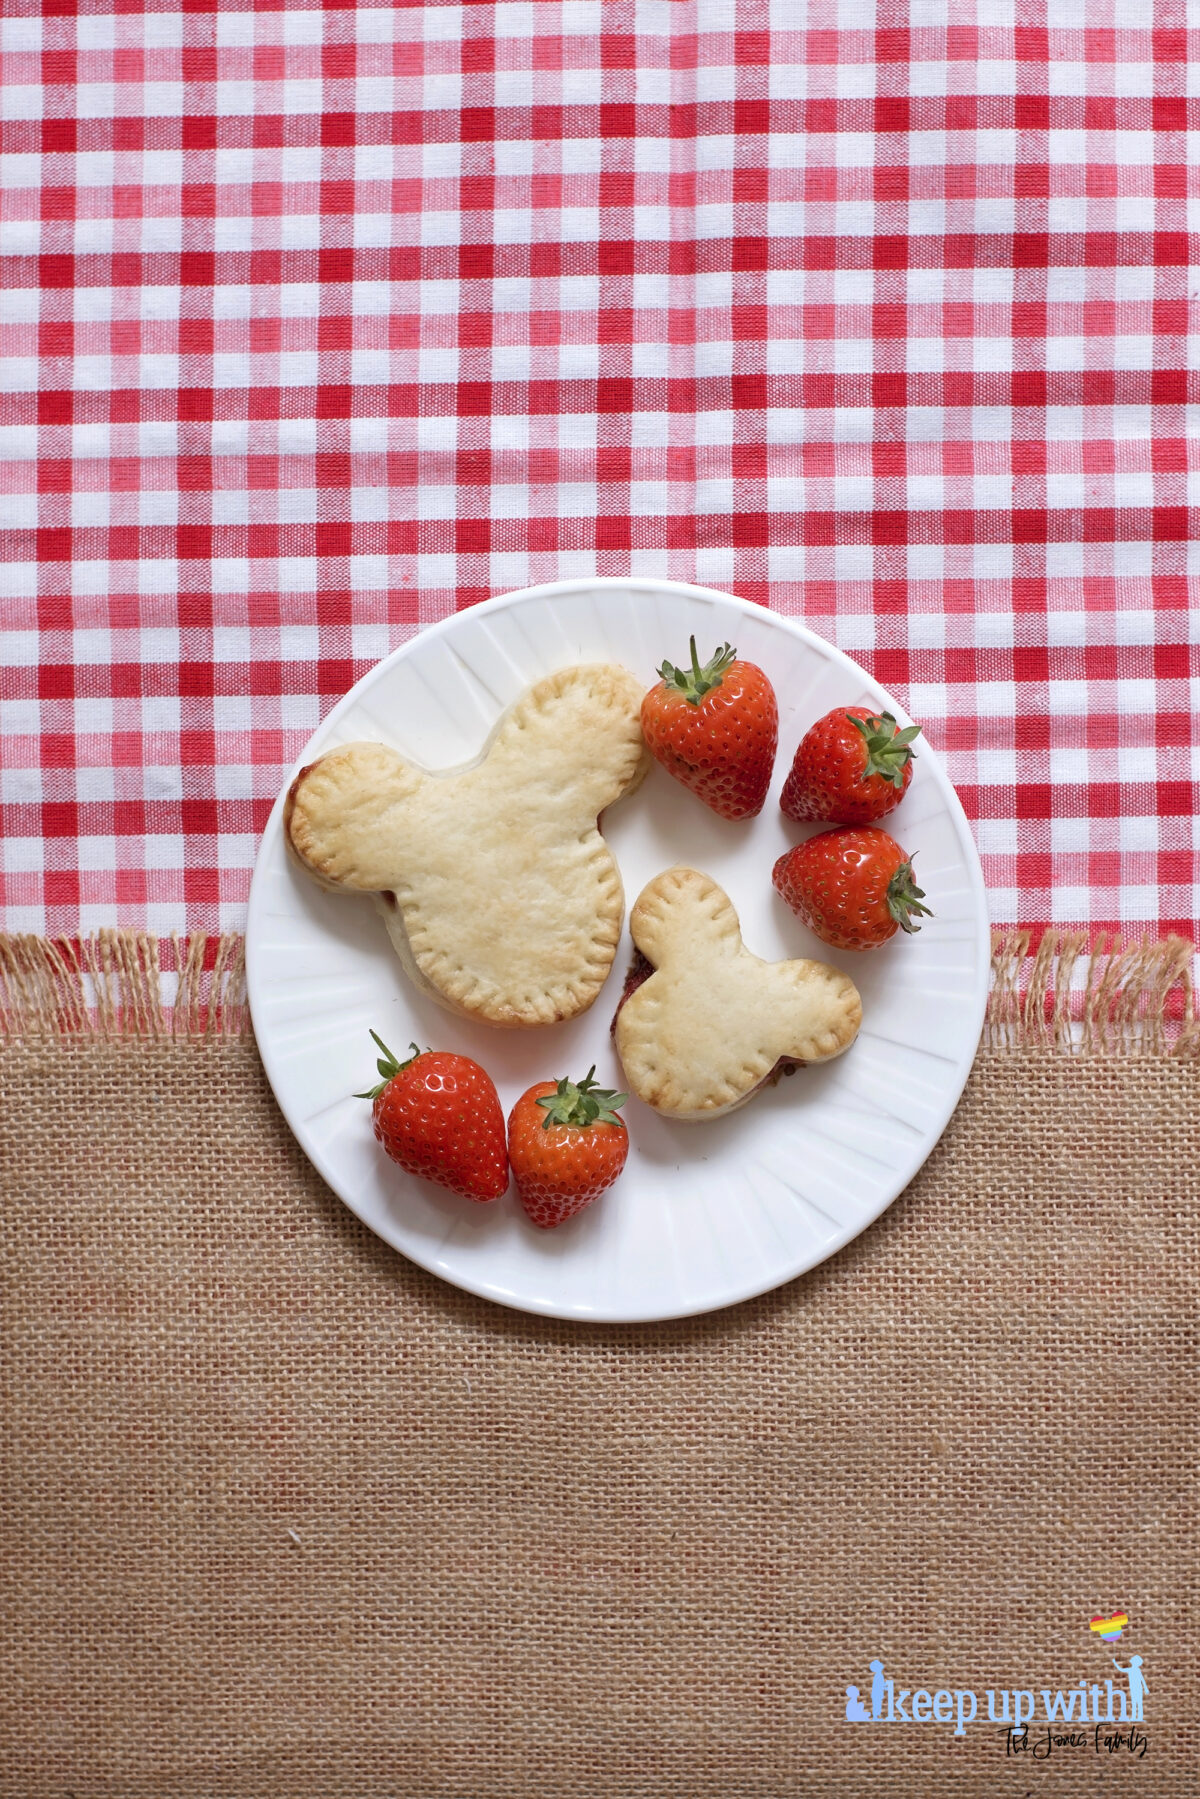 Image shows a flatlay of a red gingham checked tablecloth, overlaid with a jute burlap material with a fringe. On top is a white Vera Wang sideplate with two Mickey Mouse shaped shortcrust pies on. One is larger than the other, and there are strawberries next to the pies. There is a ShopDisney fork balancing on the plate with a summer citrus and apples pattern on it.  The image is watermarked by Keep up with the Jones Family. 